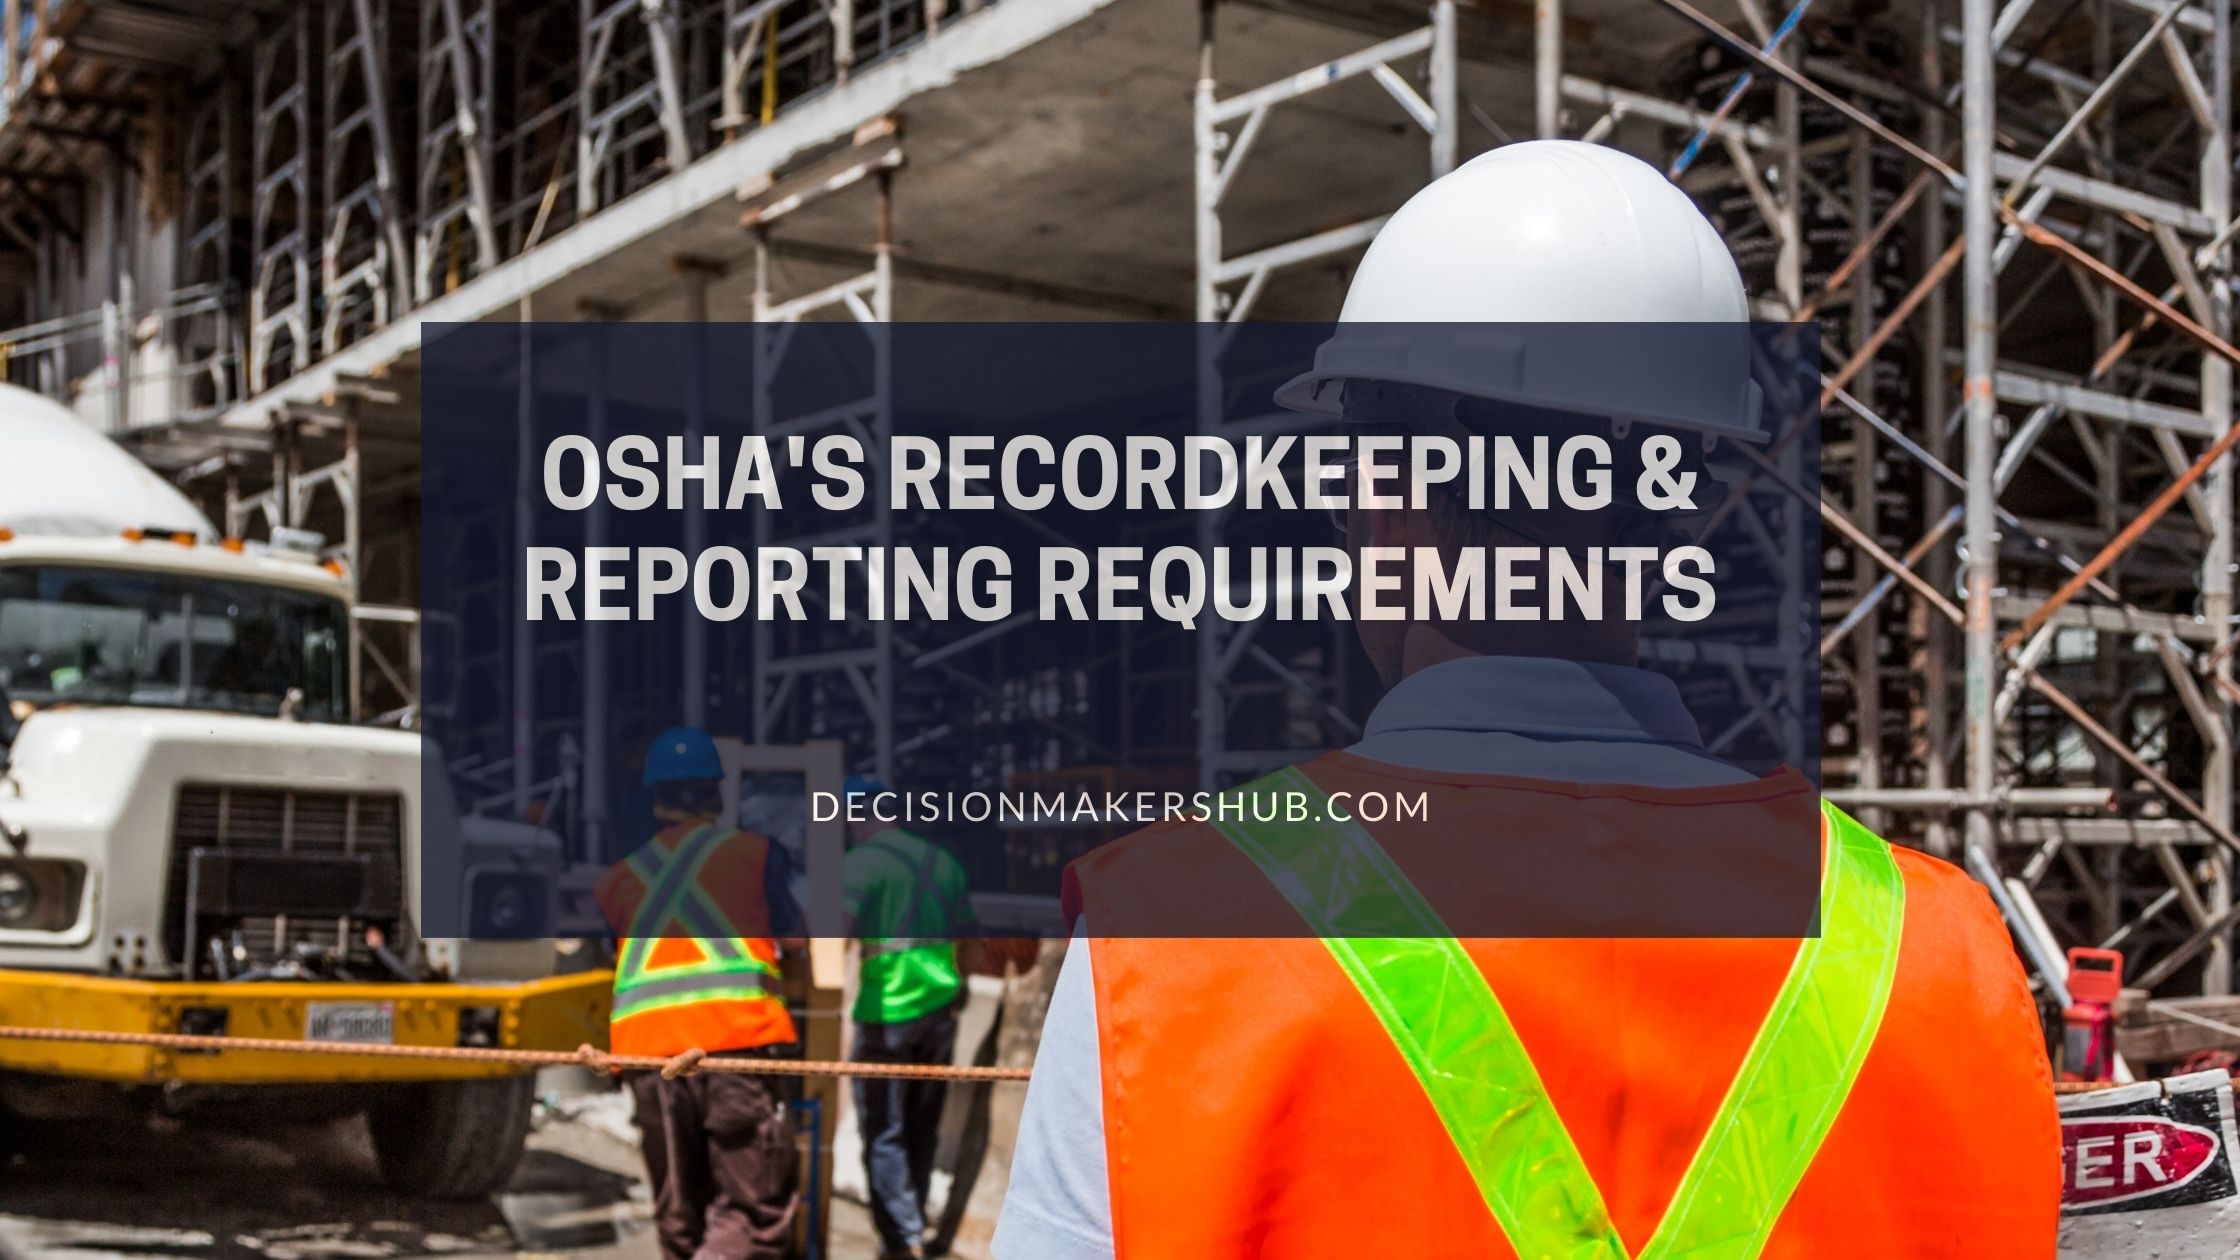 What are OSHA’s recordkeeping and reporting requirements?